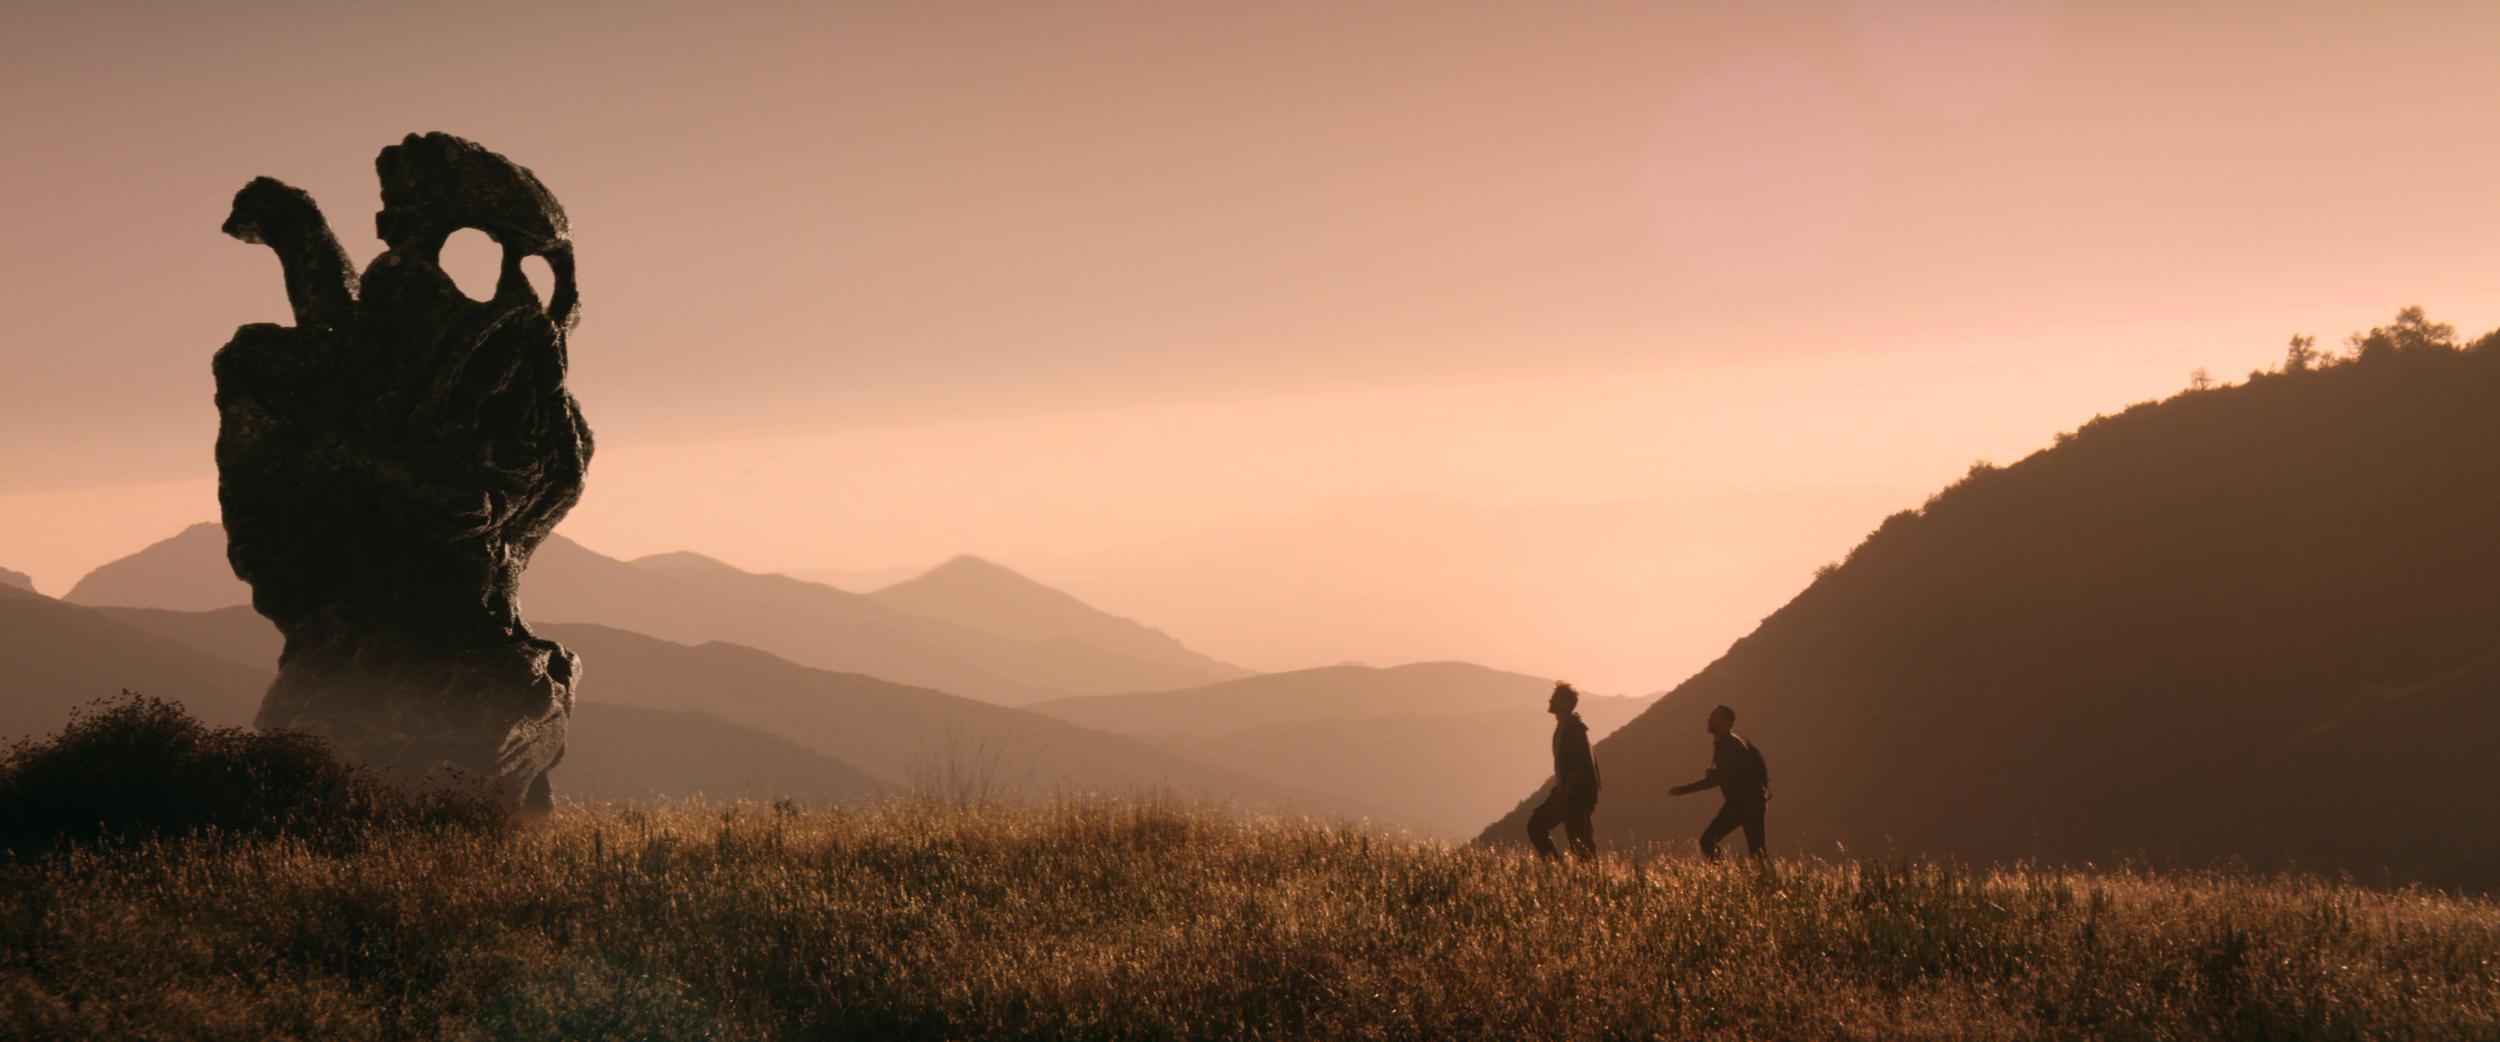 ‘The Endless’ is about resisting the pressure to conform